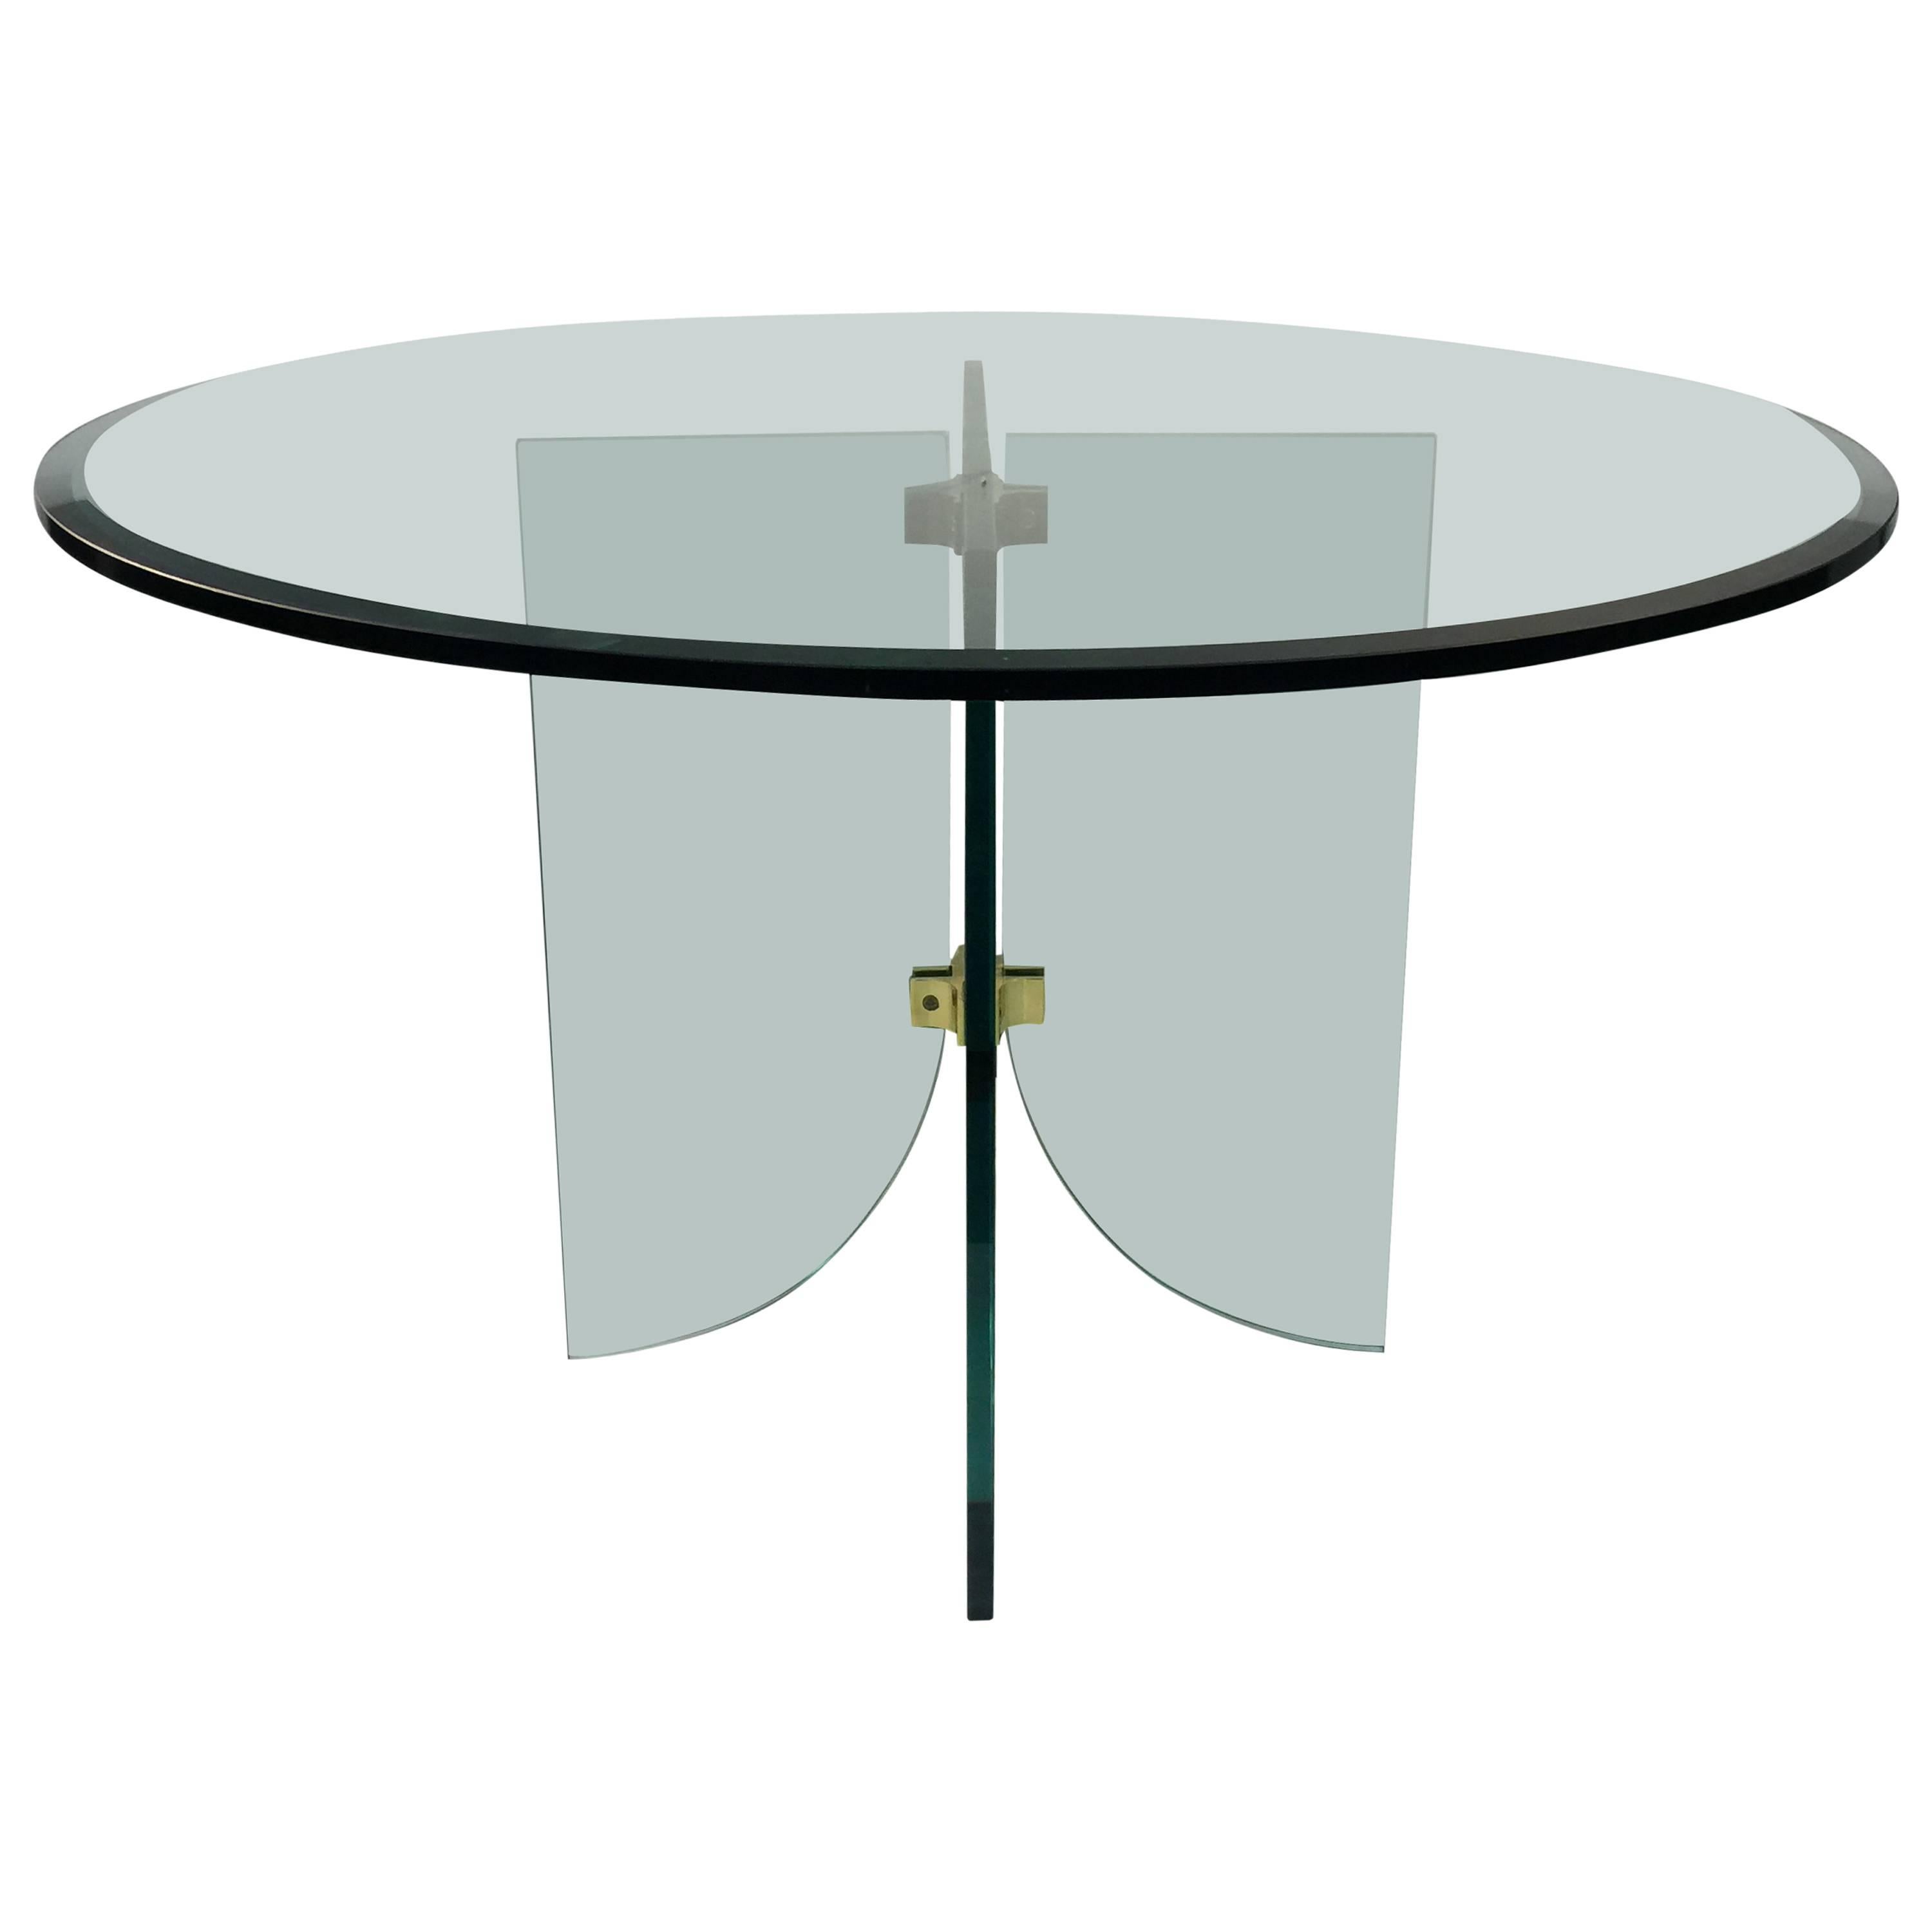 Phenomenal Pace Pedestal Glass Dining Table, circa 1970 For Sale